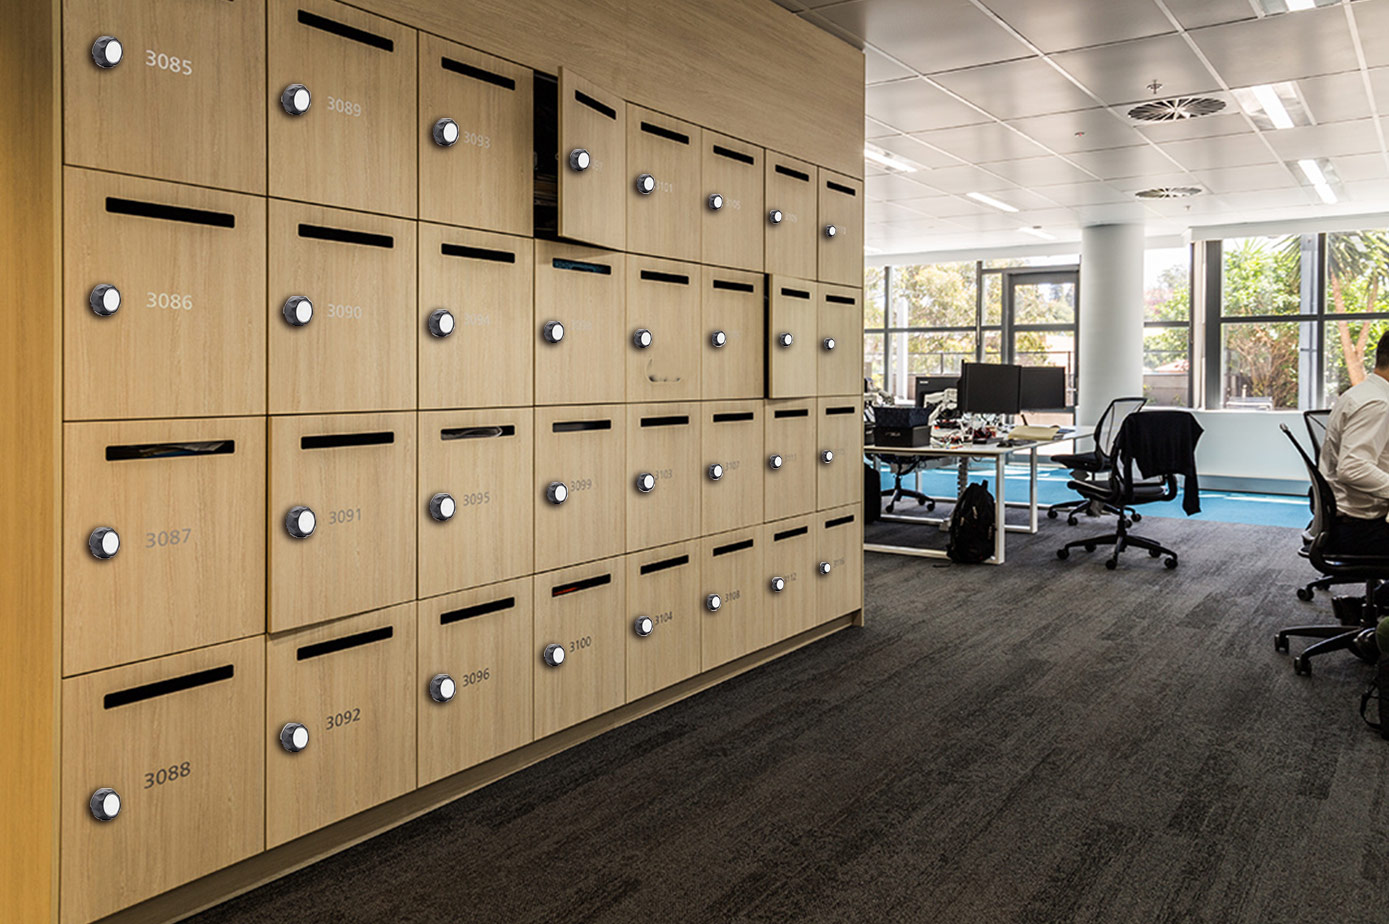 Make office furniture locks light up your office life